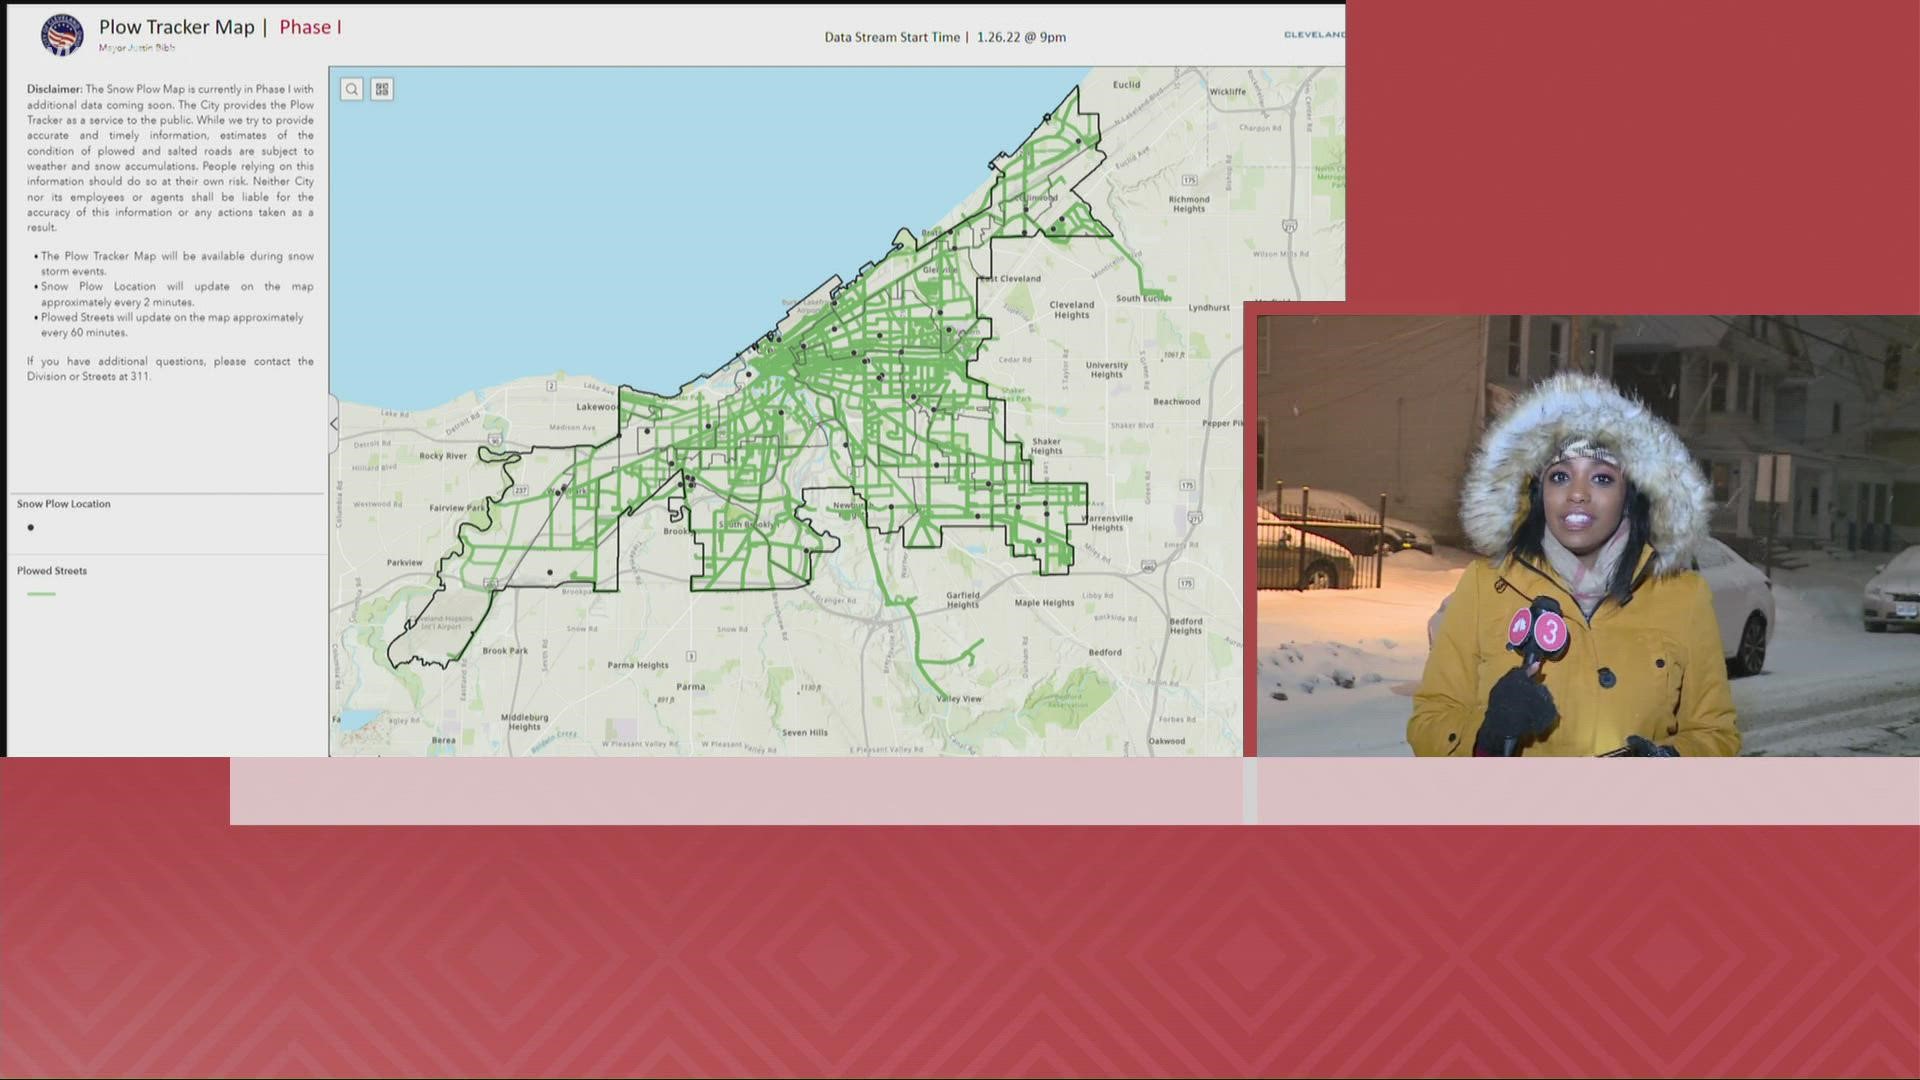 3News' Jasmine Monroe shows how the city of Cleveland's snow plow tracker works.